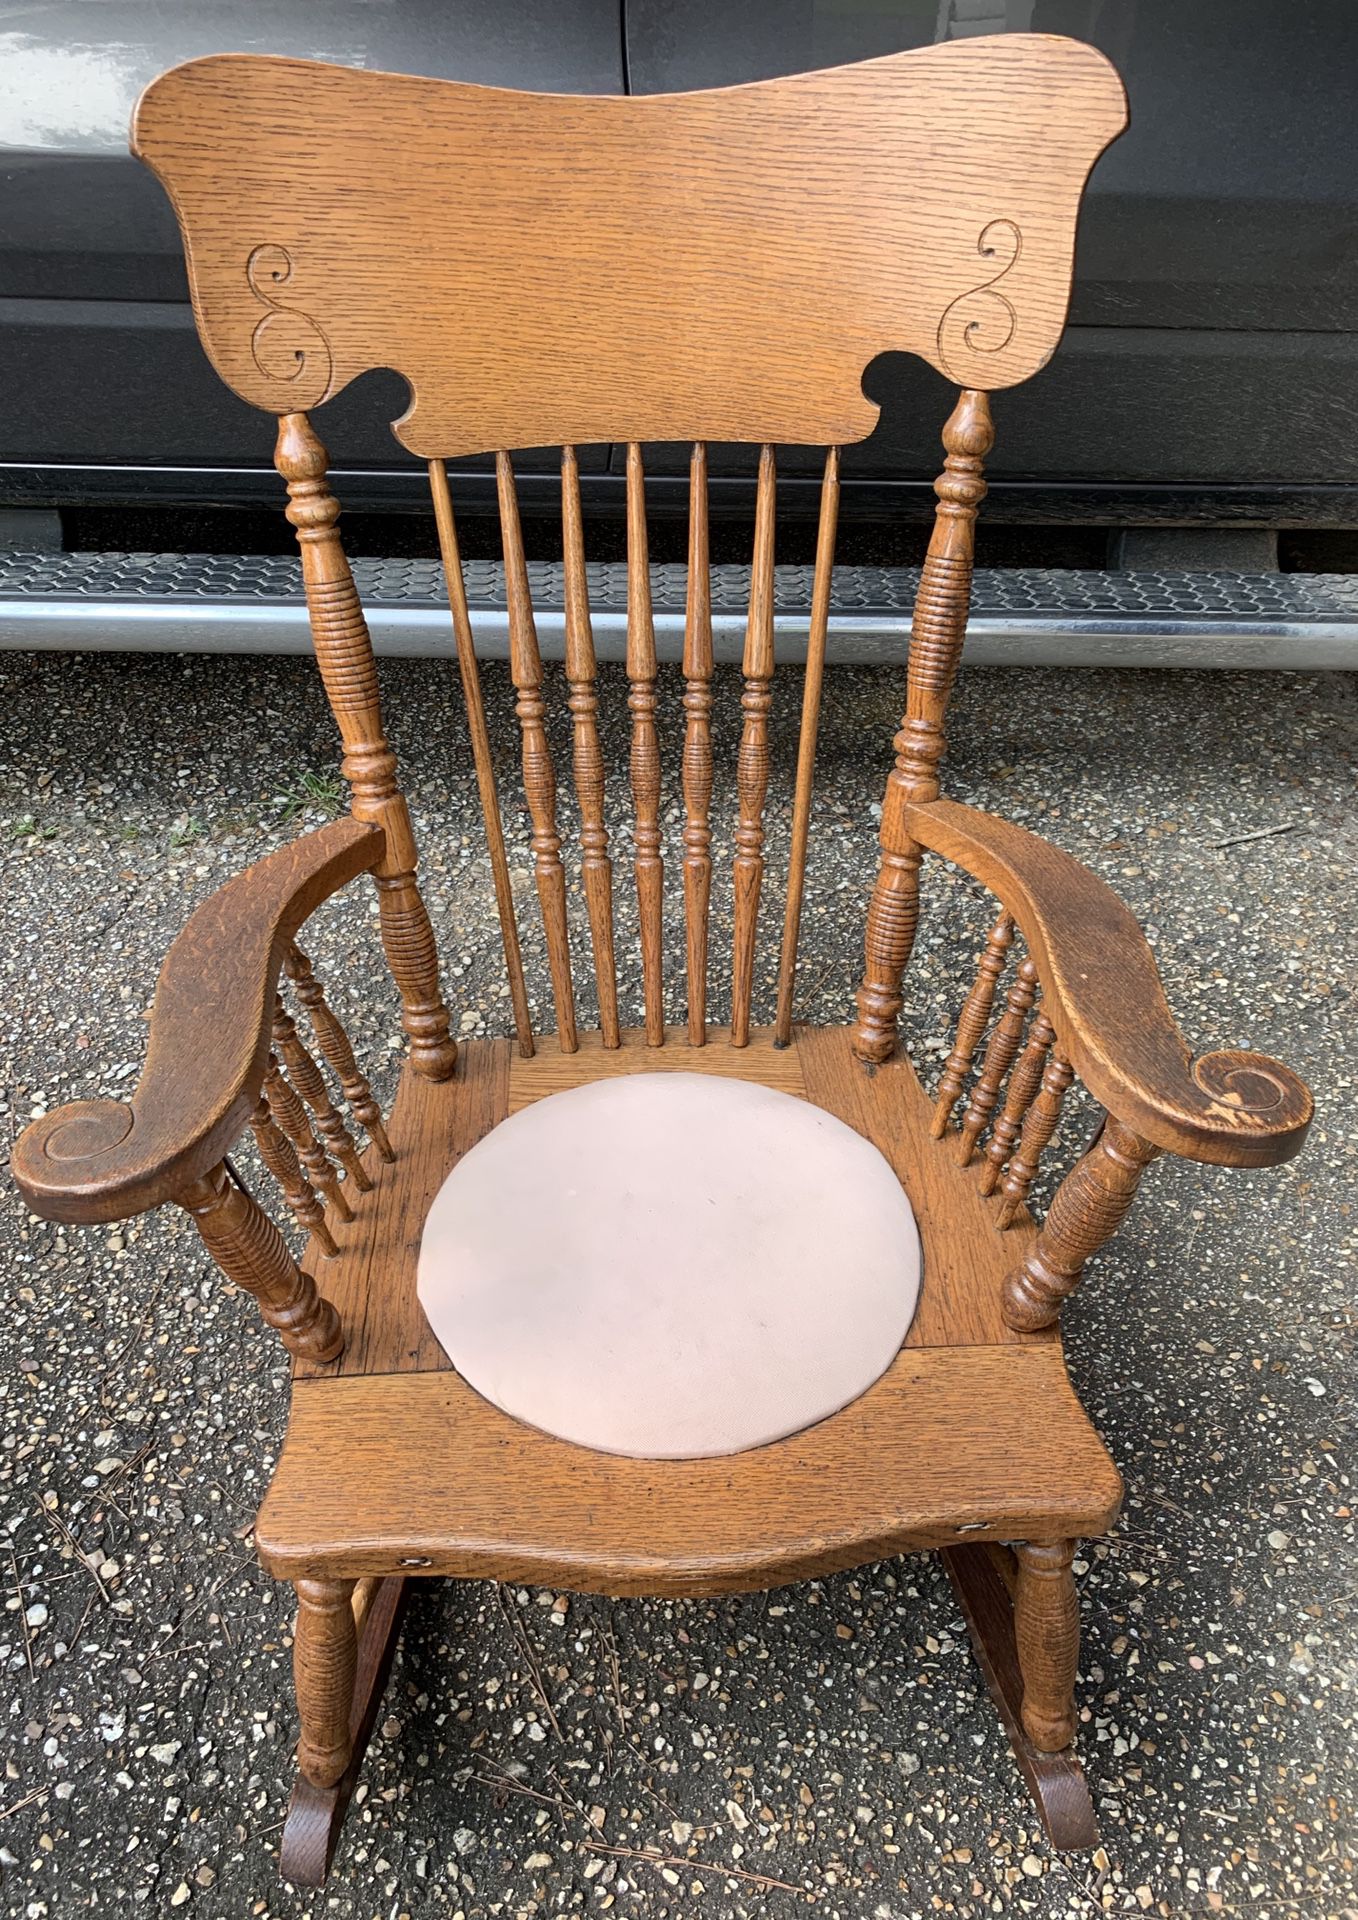 Vintage wooden rocking chairs